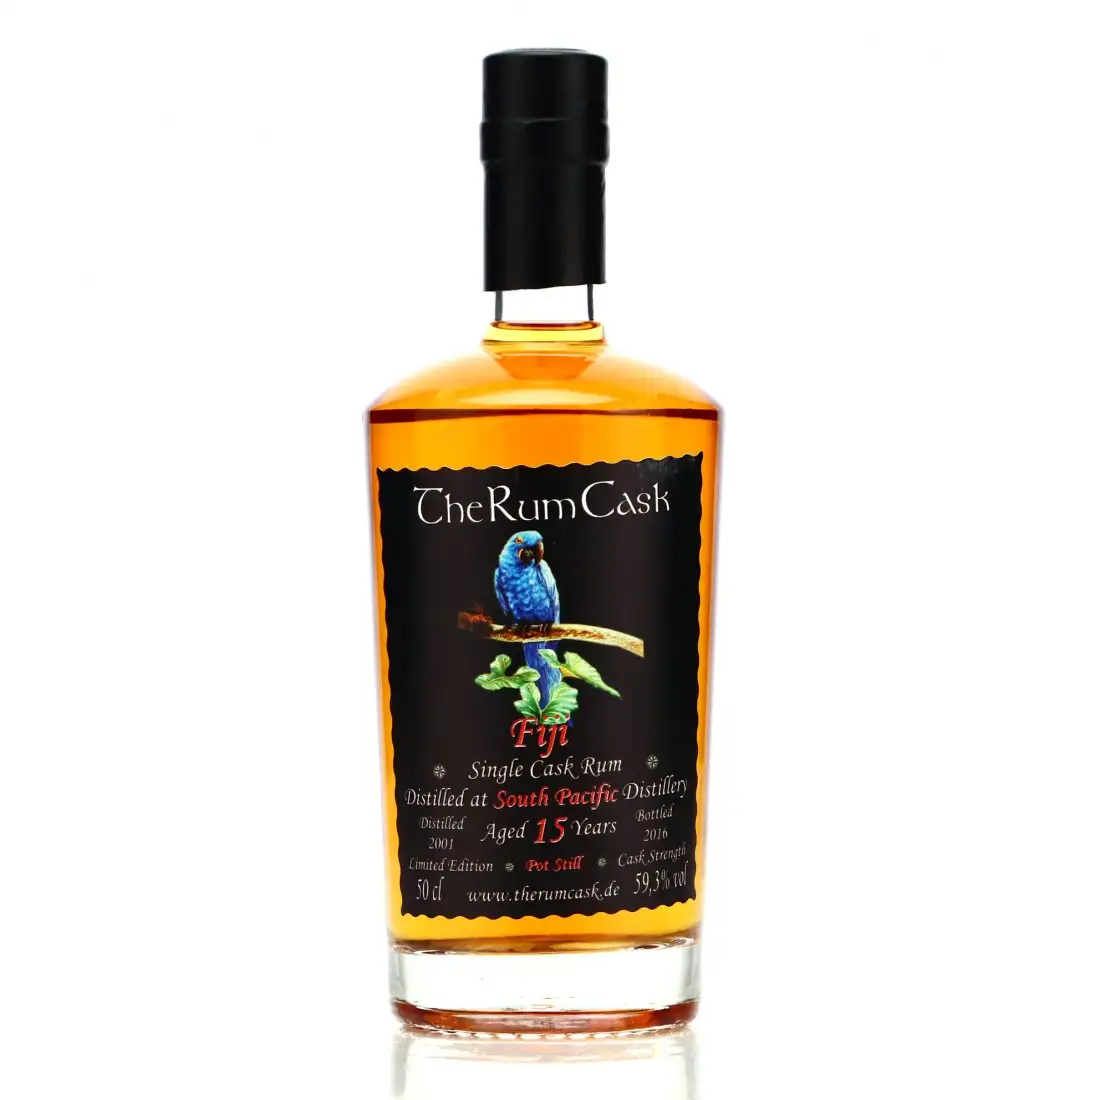 Image of the front of the bottle of the rum Fiji